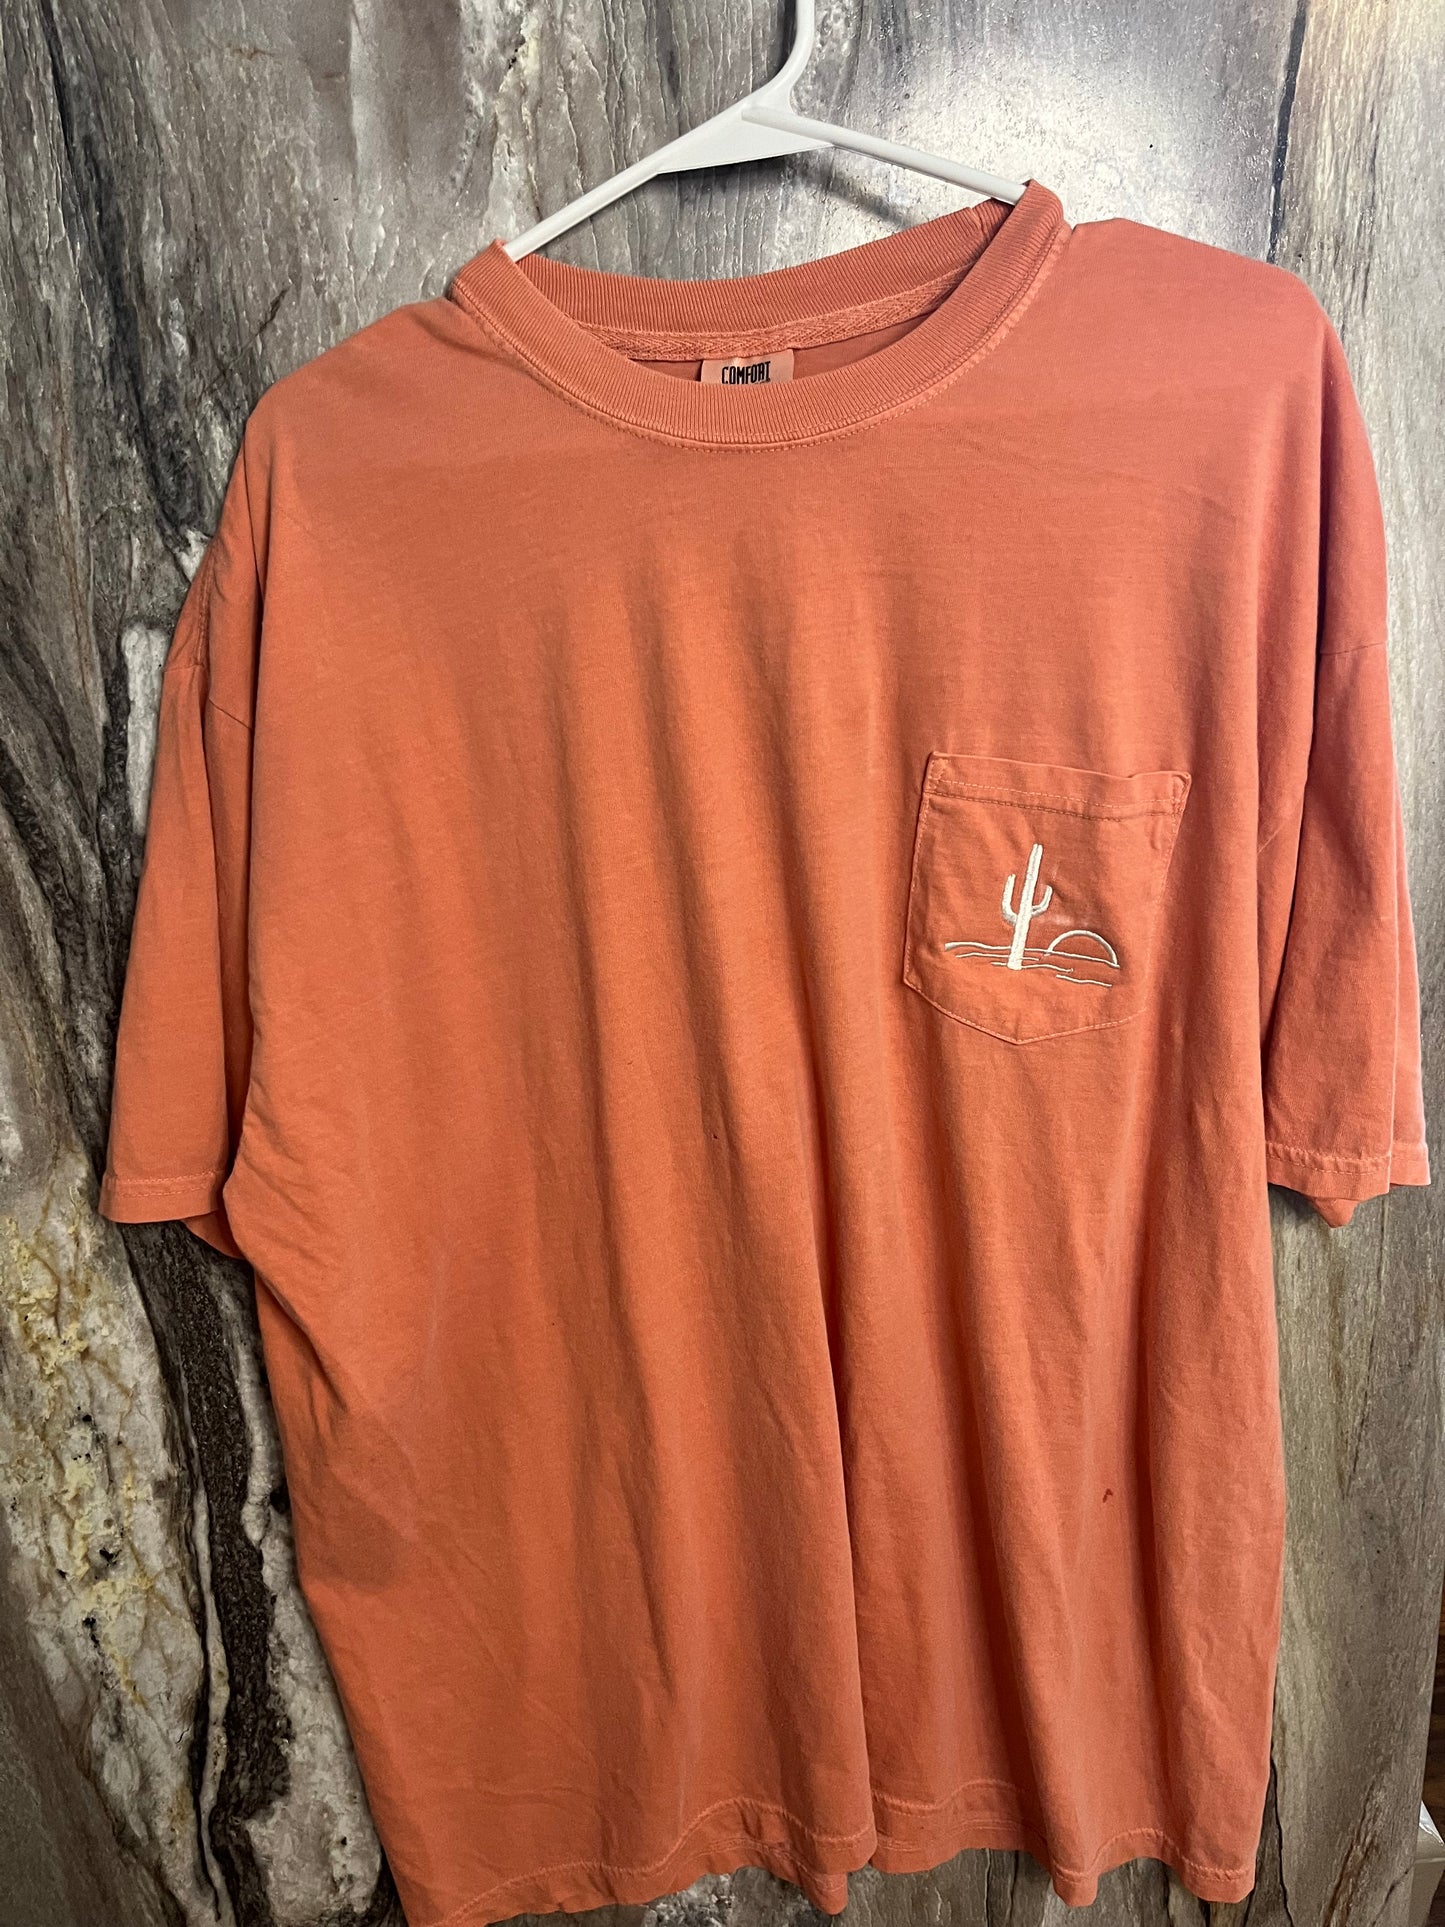 Men’s Cactus Embroidered Pocket Tee